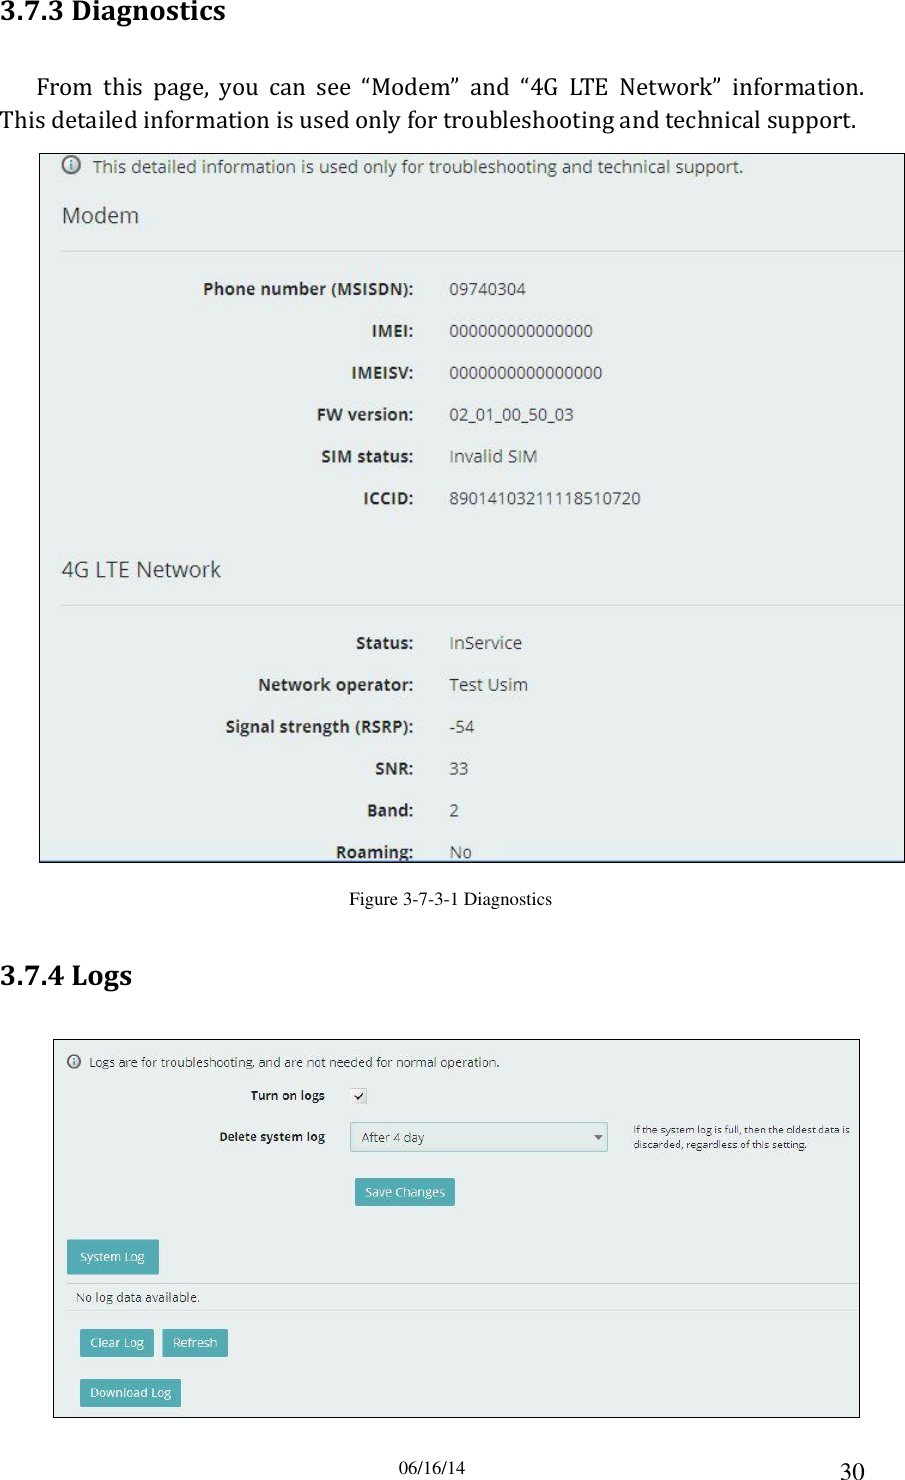 06/16/14 30 3.7.3 Diagnostics From  this  page,  you  can  see  “Modem”  and  “4G  LTE  Network”  information. This detailed information is used only for troubleshooting and technical support.  Figure 3-7-3-1 Diagnostics 3.7.4 Logs       